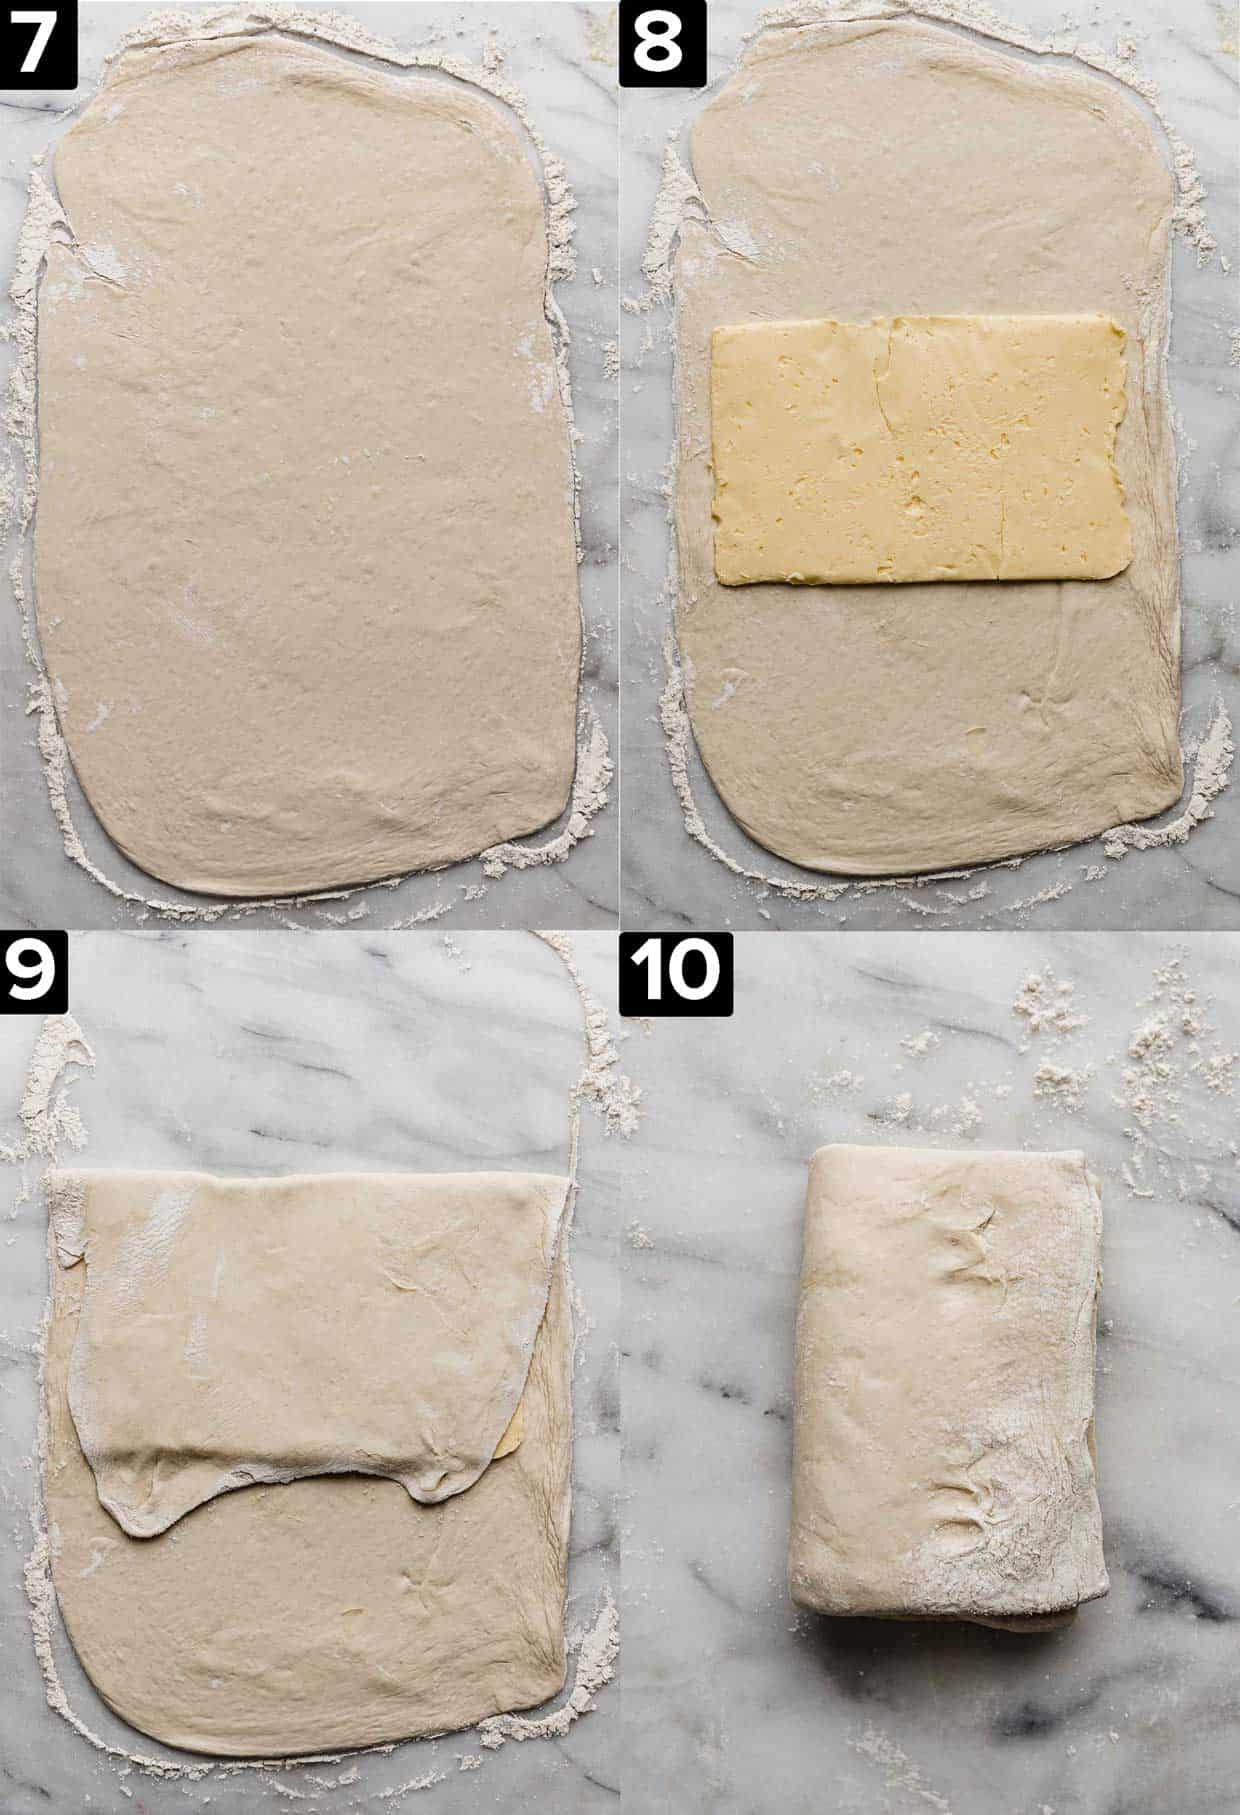 Four images showing how to make Kouign-Amann by doing laminated butter and dough turns.